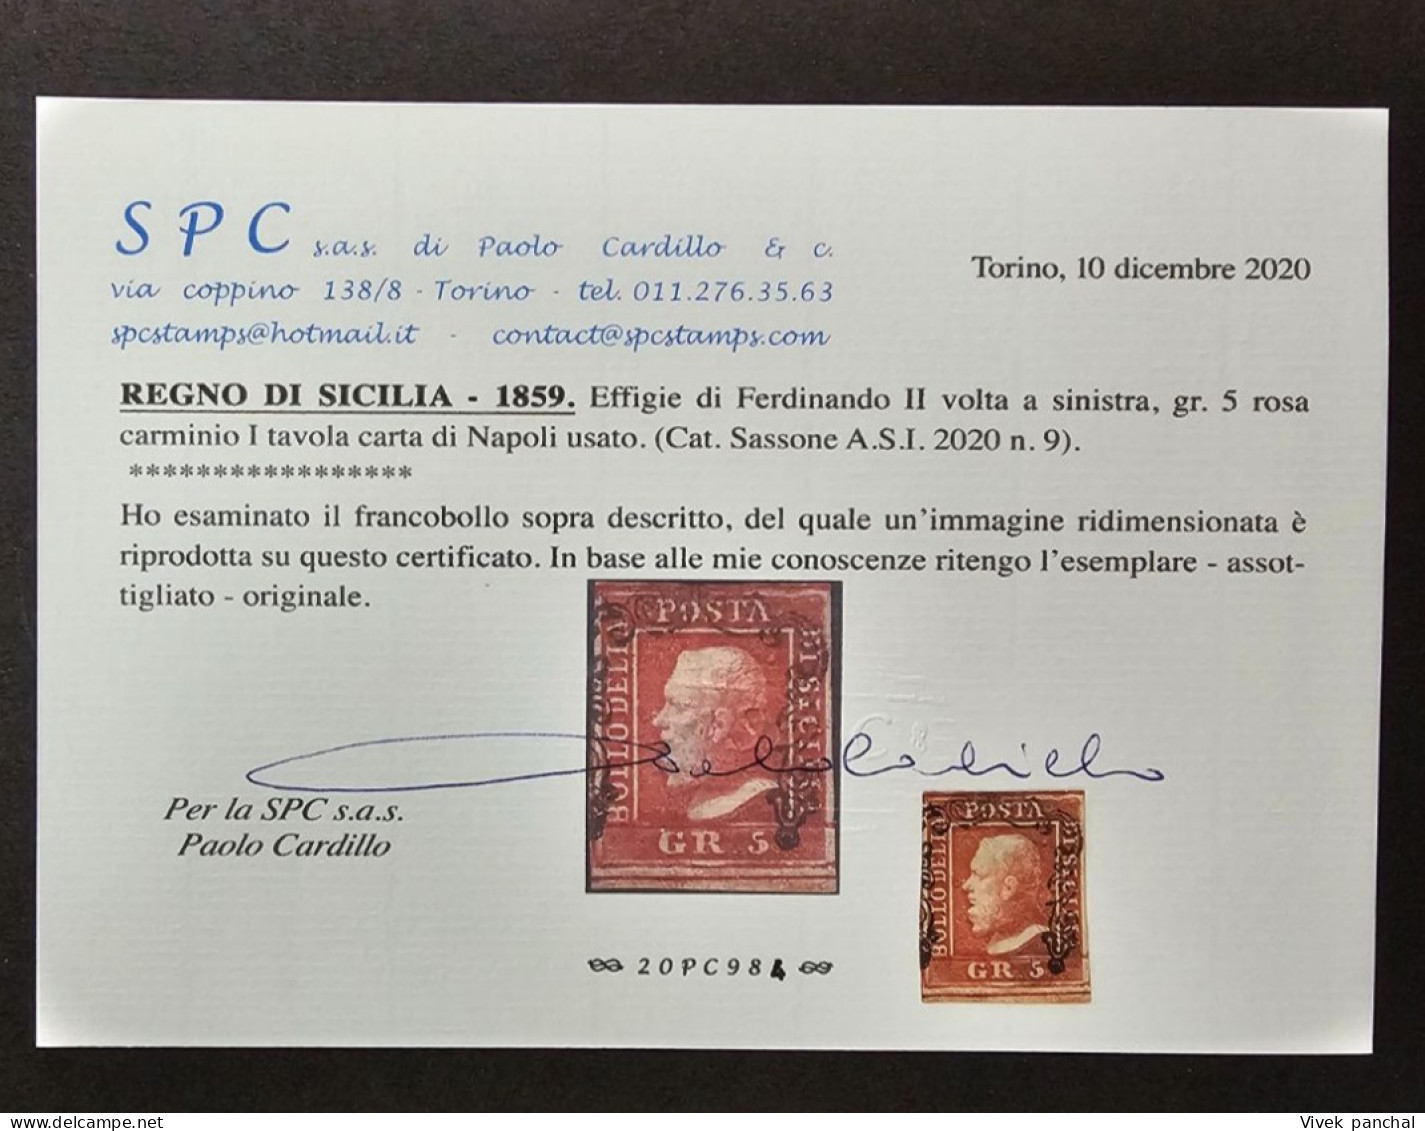 1859 Italy State Sicily Lot of 3 Stamps with Certificates 5gr